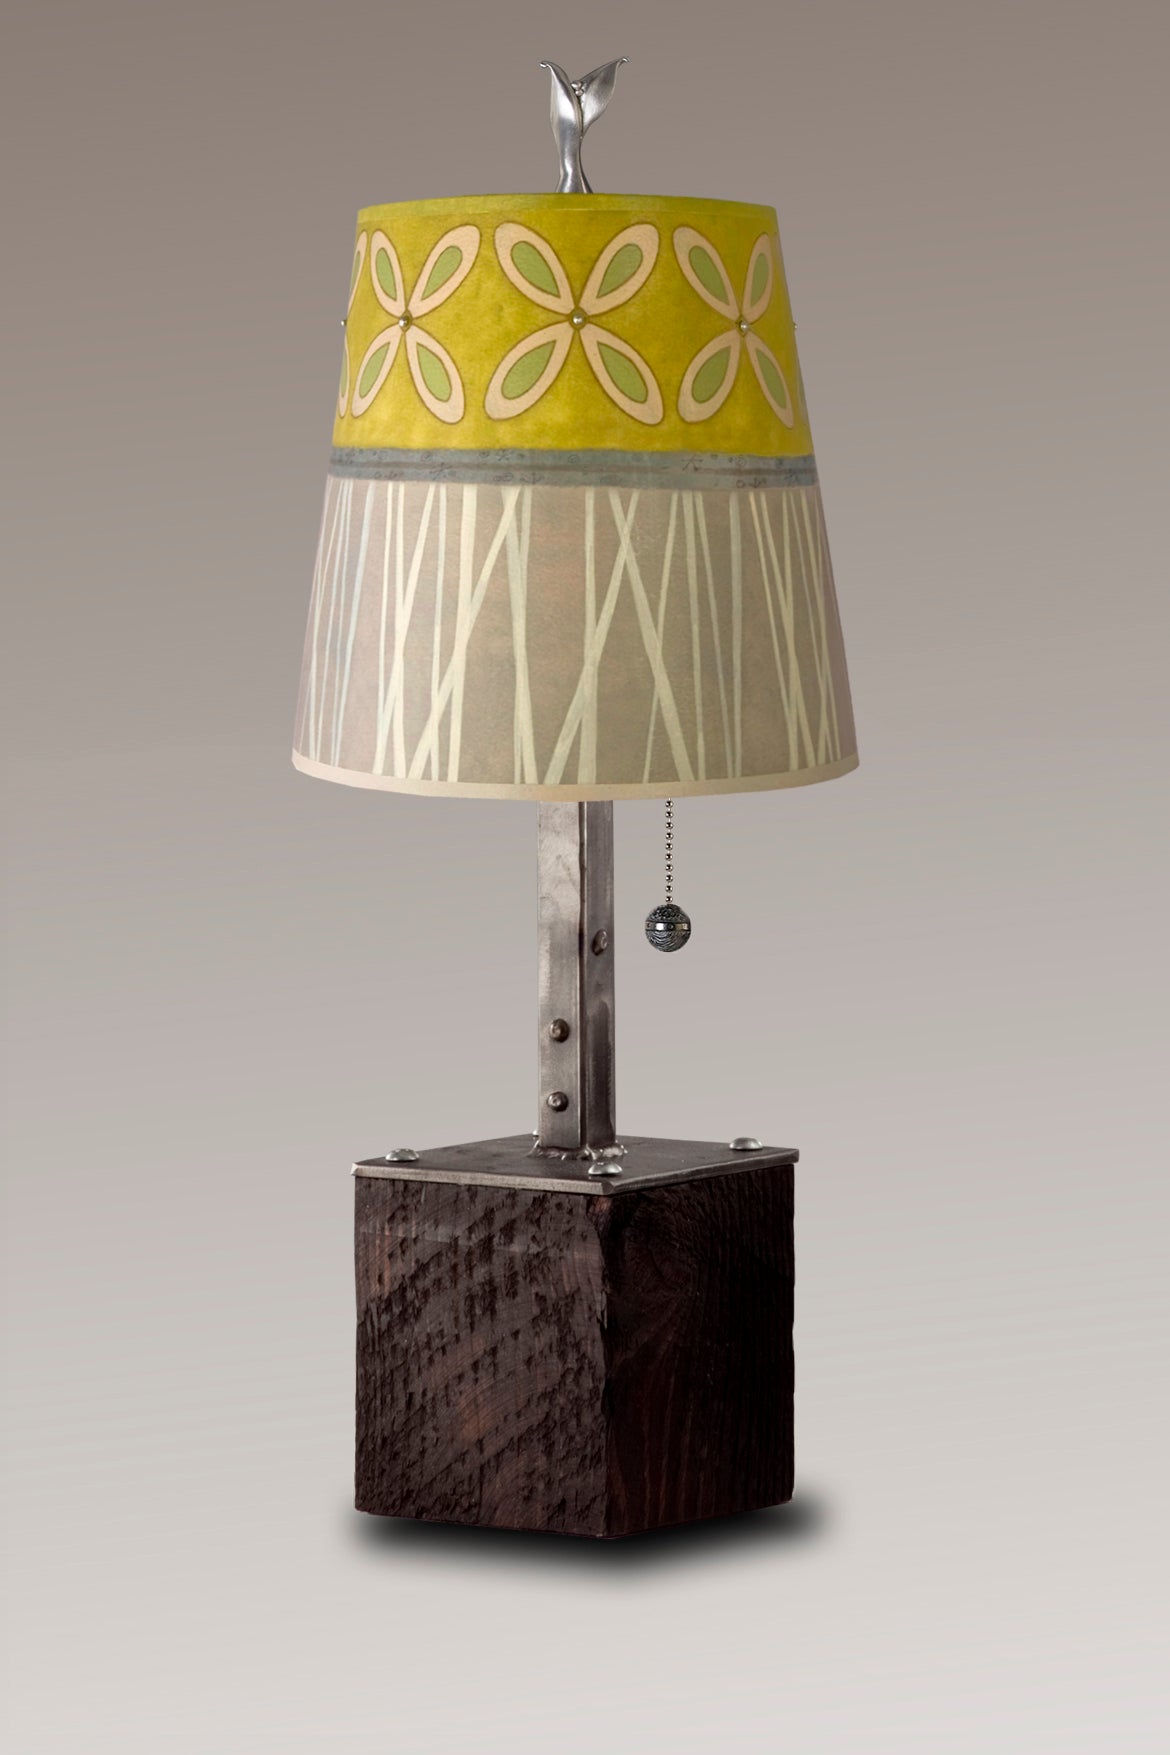 Janna Ugone & Co Table Lamps Steel Table Lamp on Reclaimed Wood with Small Drum Shade in Kiwi